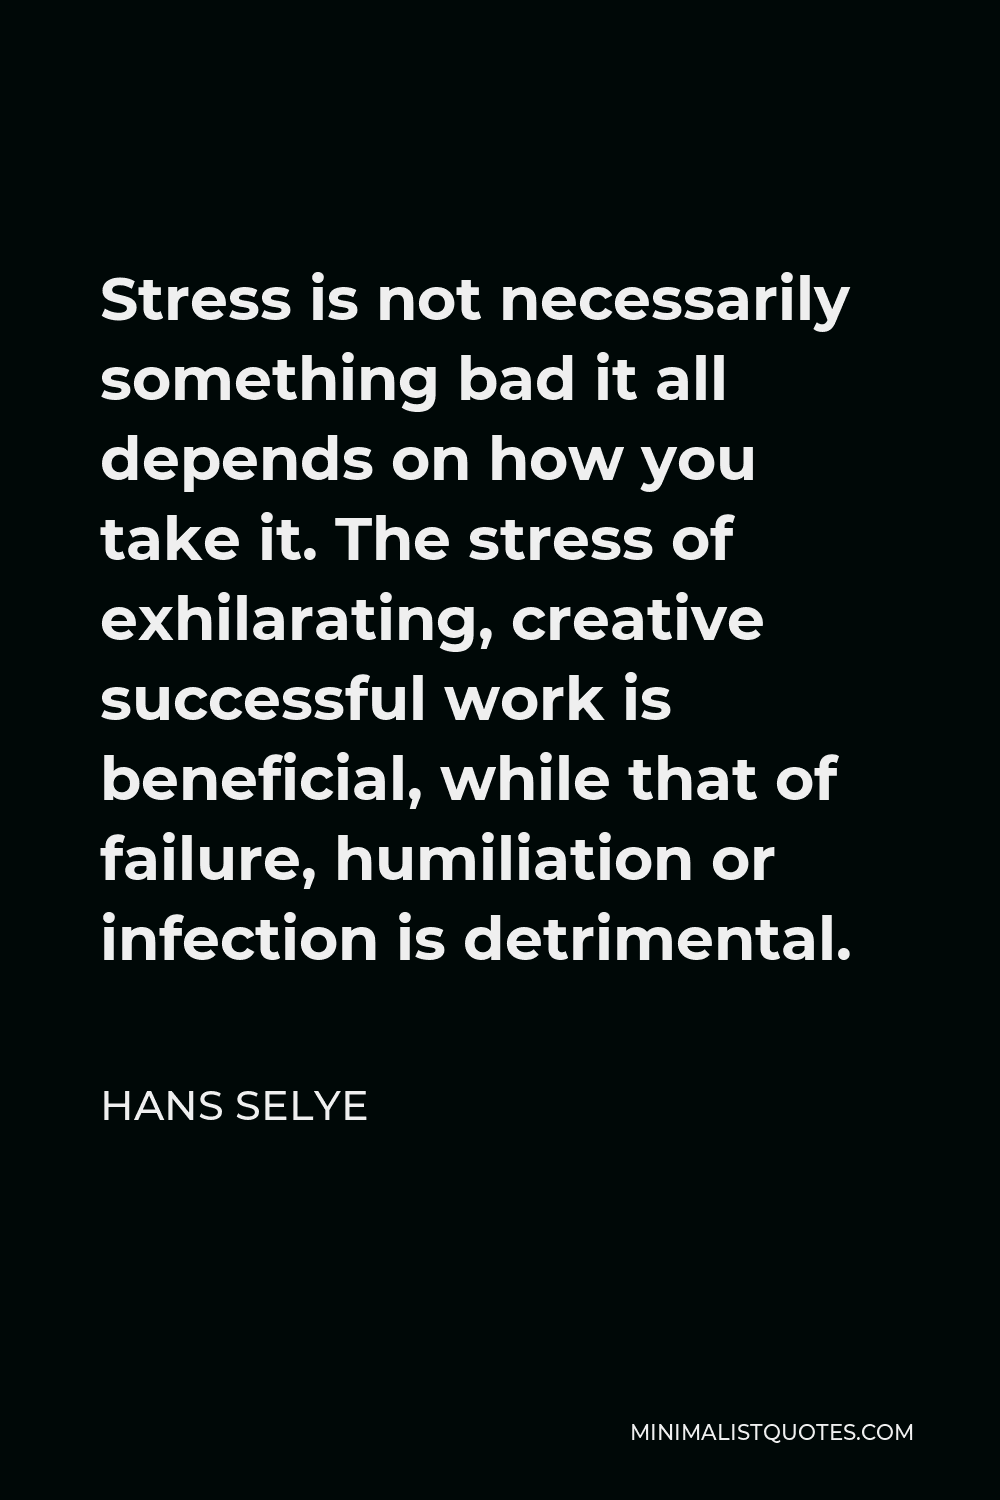 Hans Selye Quote - Stress is not necessarily something bad it all depends on how you take it. The stress of exhilarating, creative successful work is beneficial, while that of failure, humiliation or infection is detrimental.